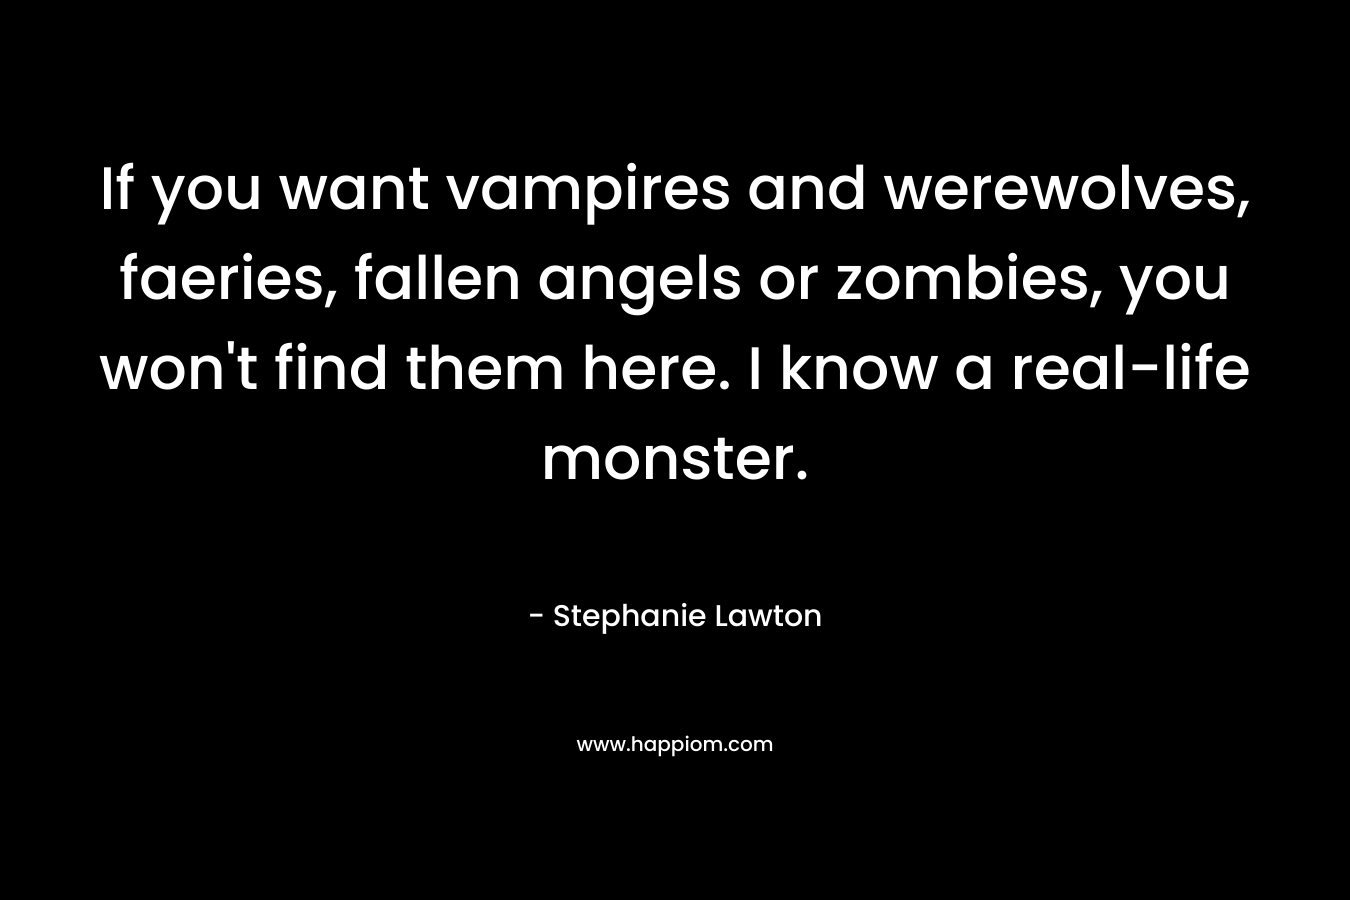 If you want vampires and werewolves, faeries, fallen angels or zombies, you won't find them here. I know a real-life monster.